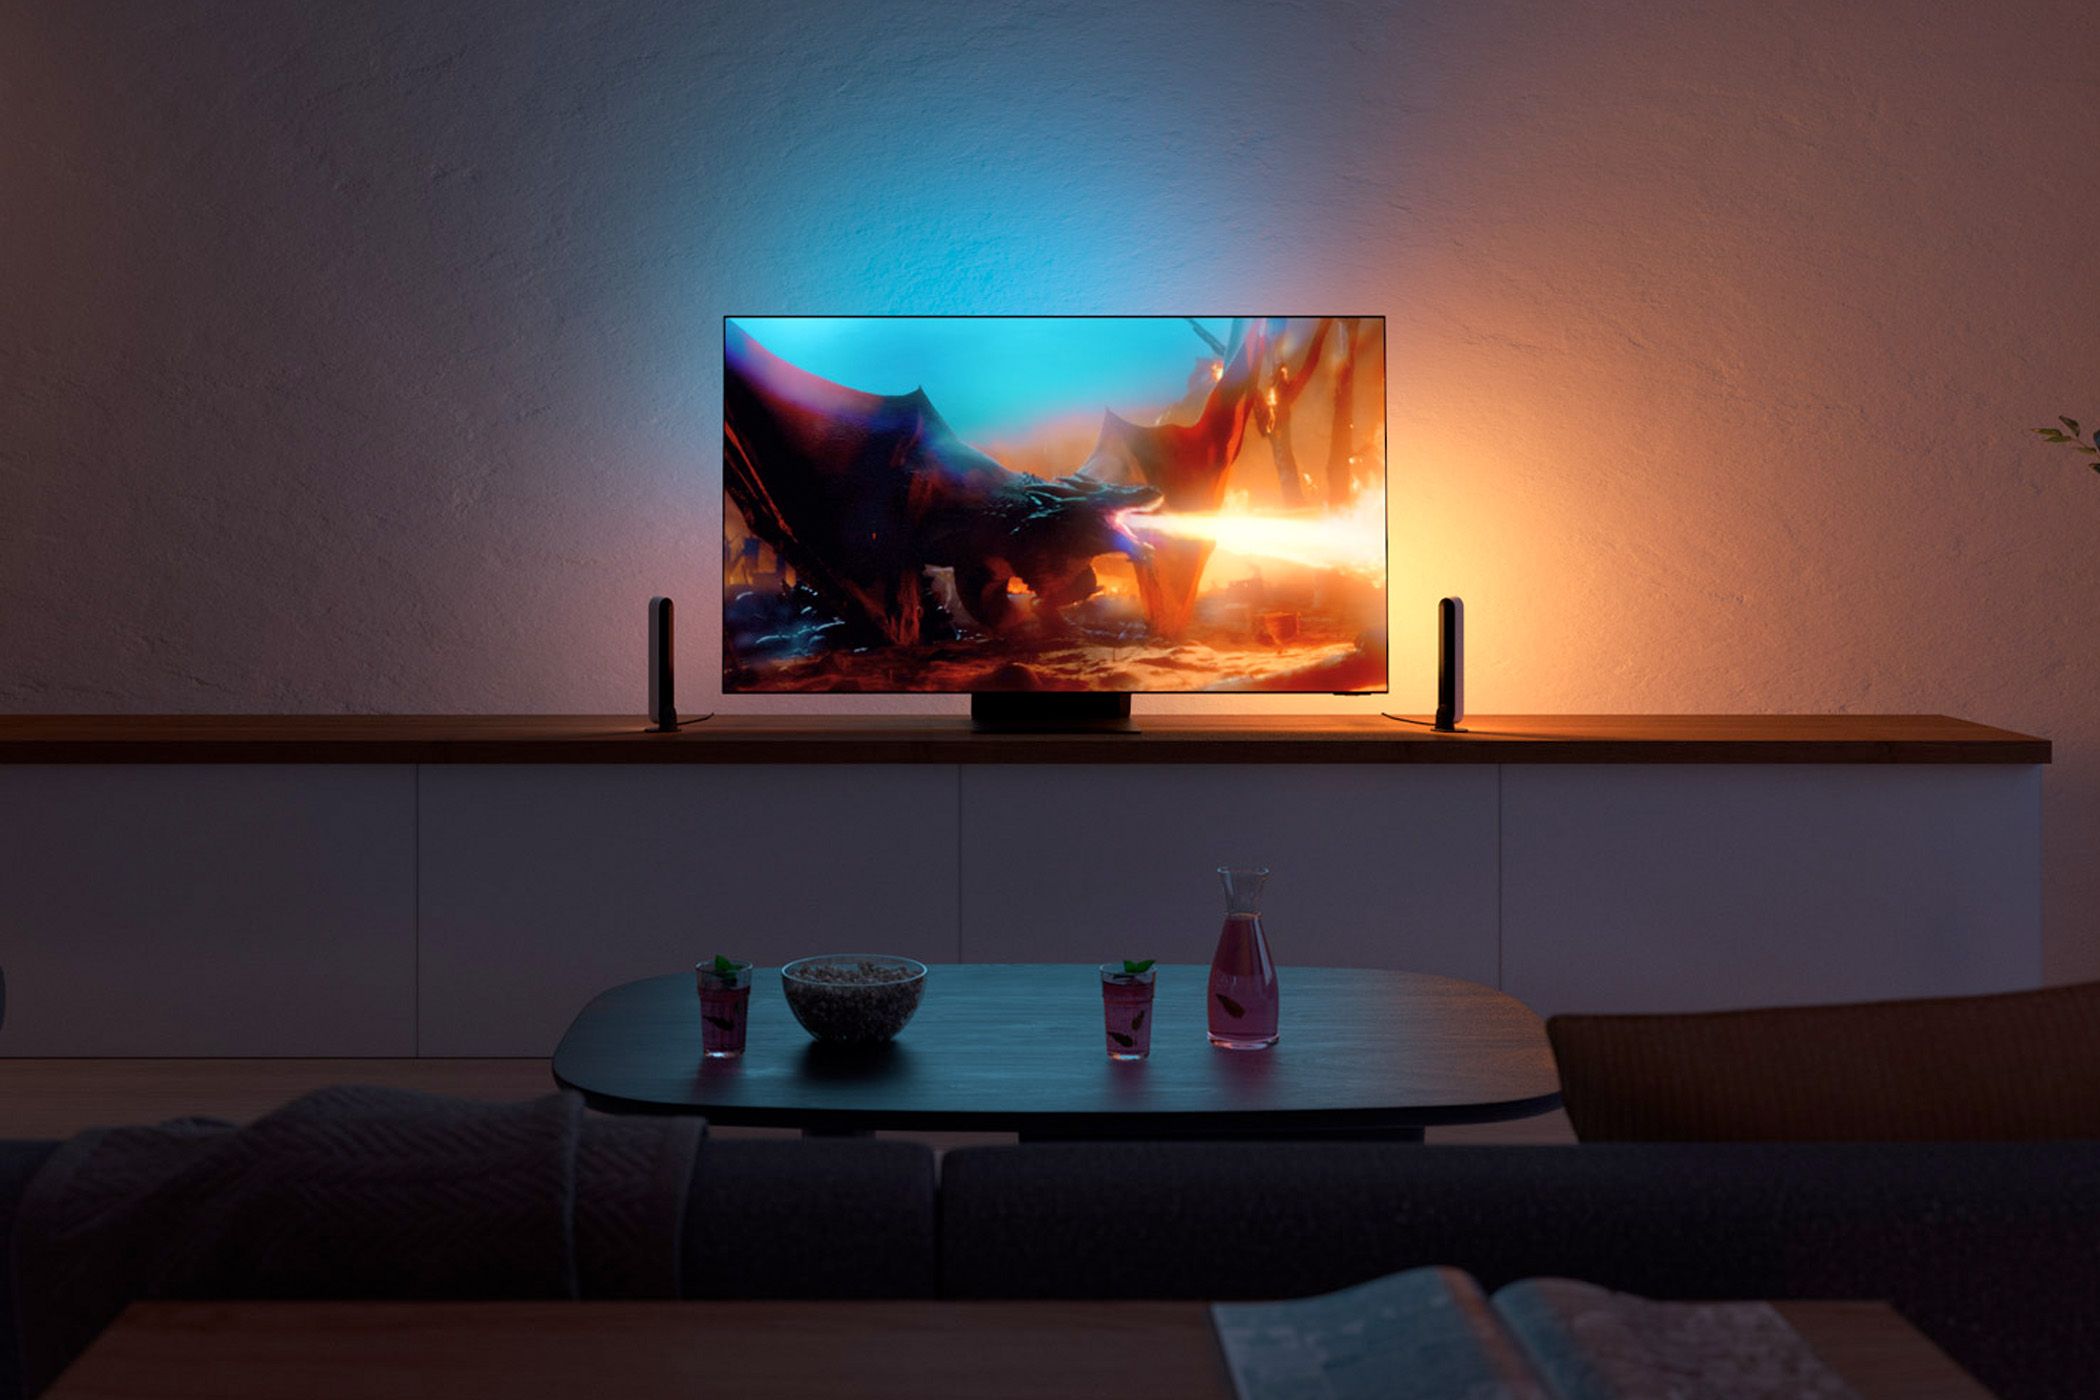 A TV with accent lighting that matches the colors of the TV's content.